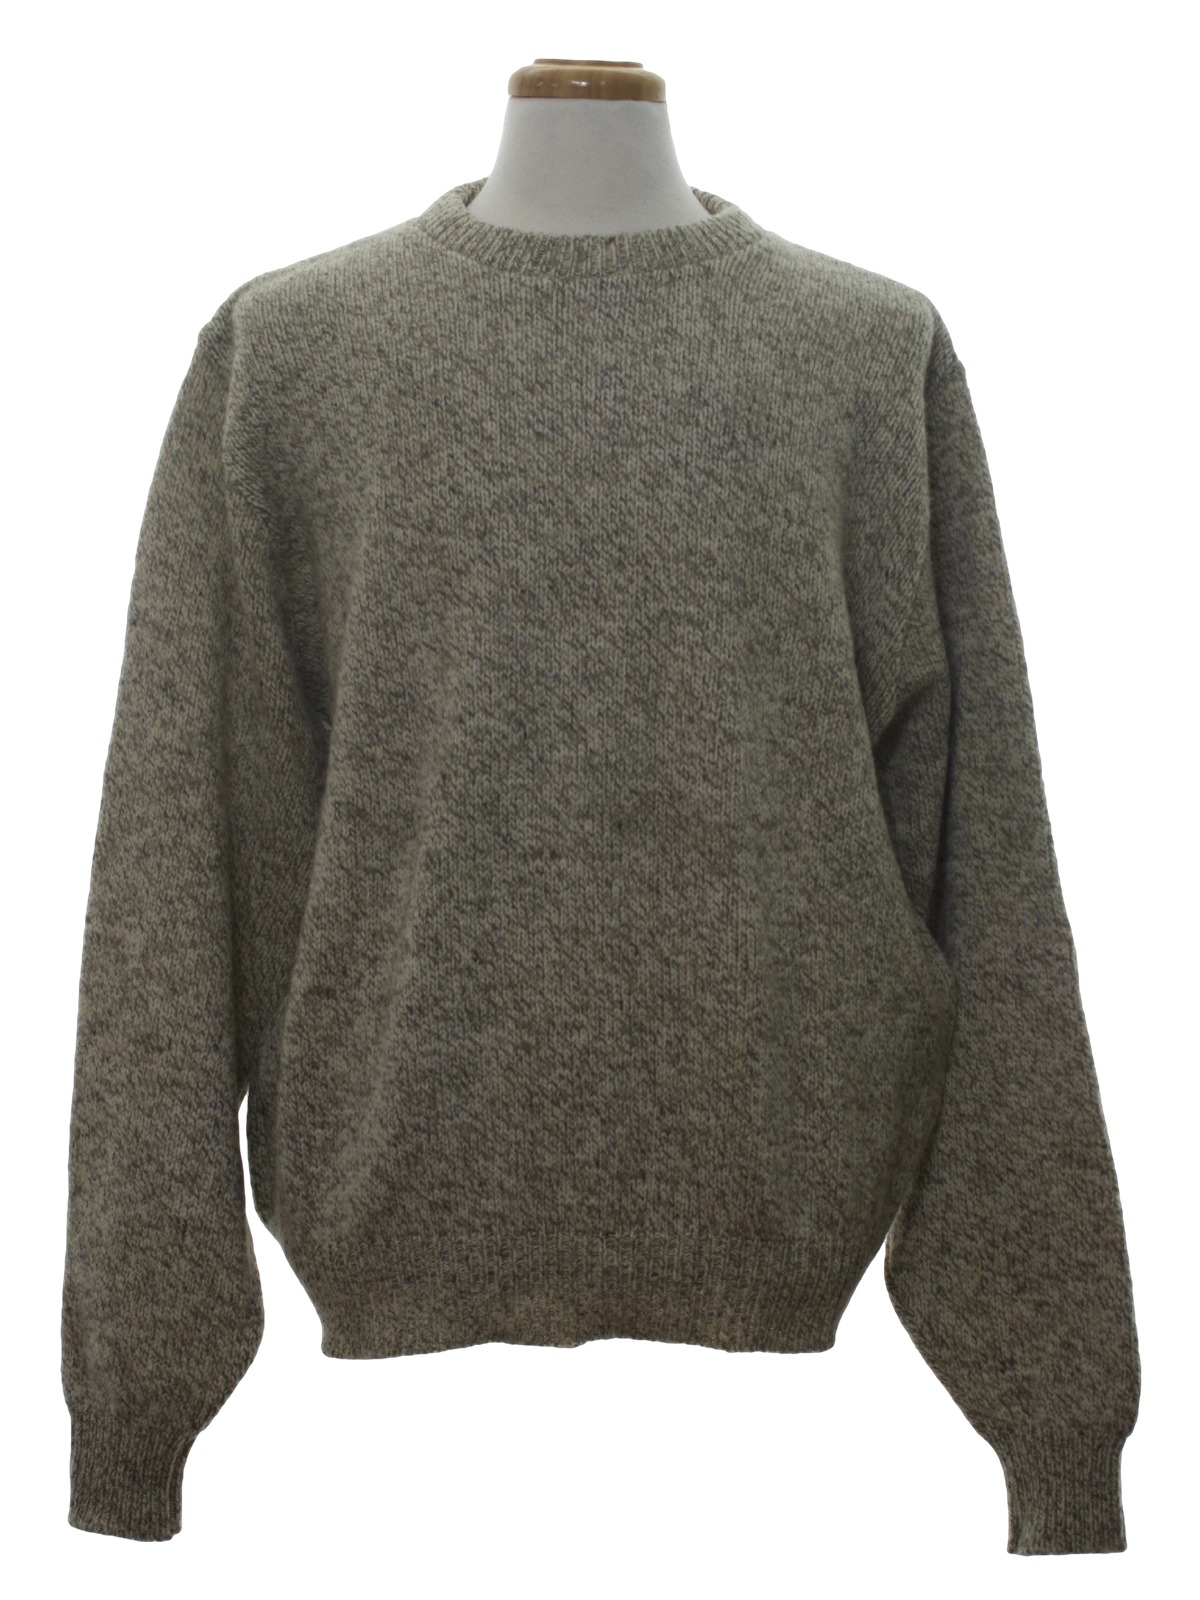 Lands End Eighties Vintage Sweater: 80s -Lands End- Mens heathered off ...